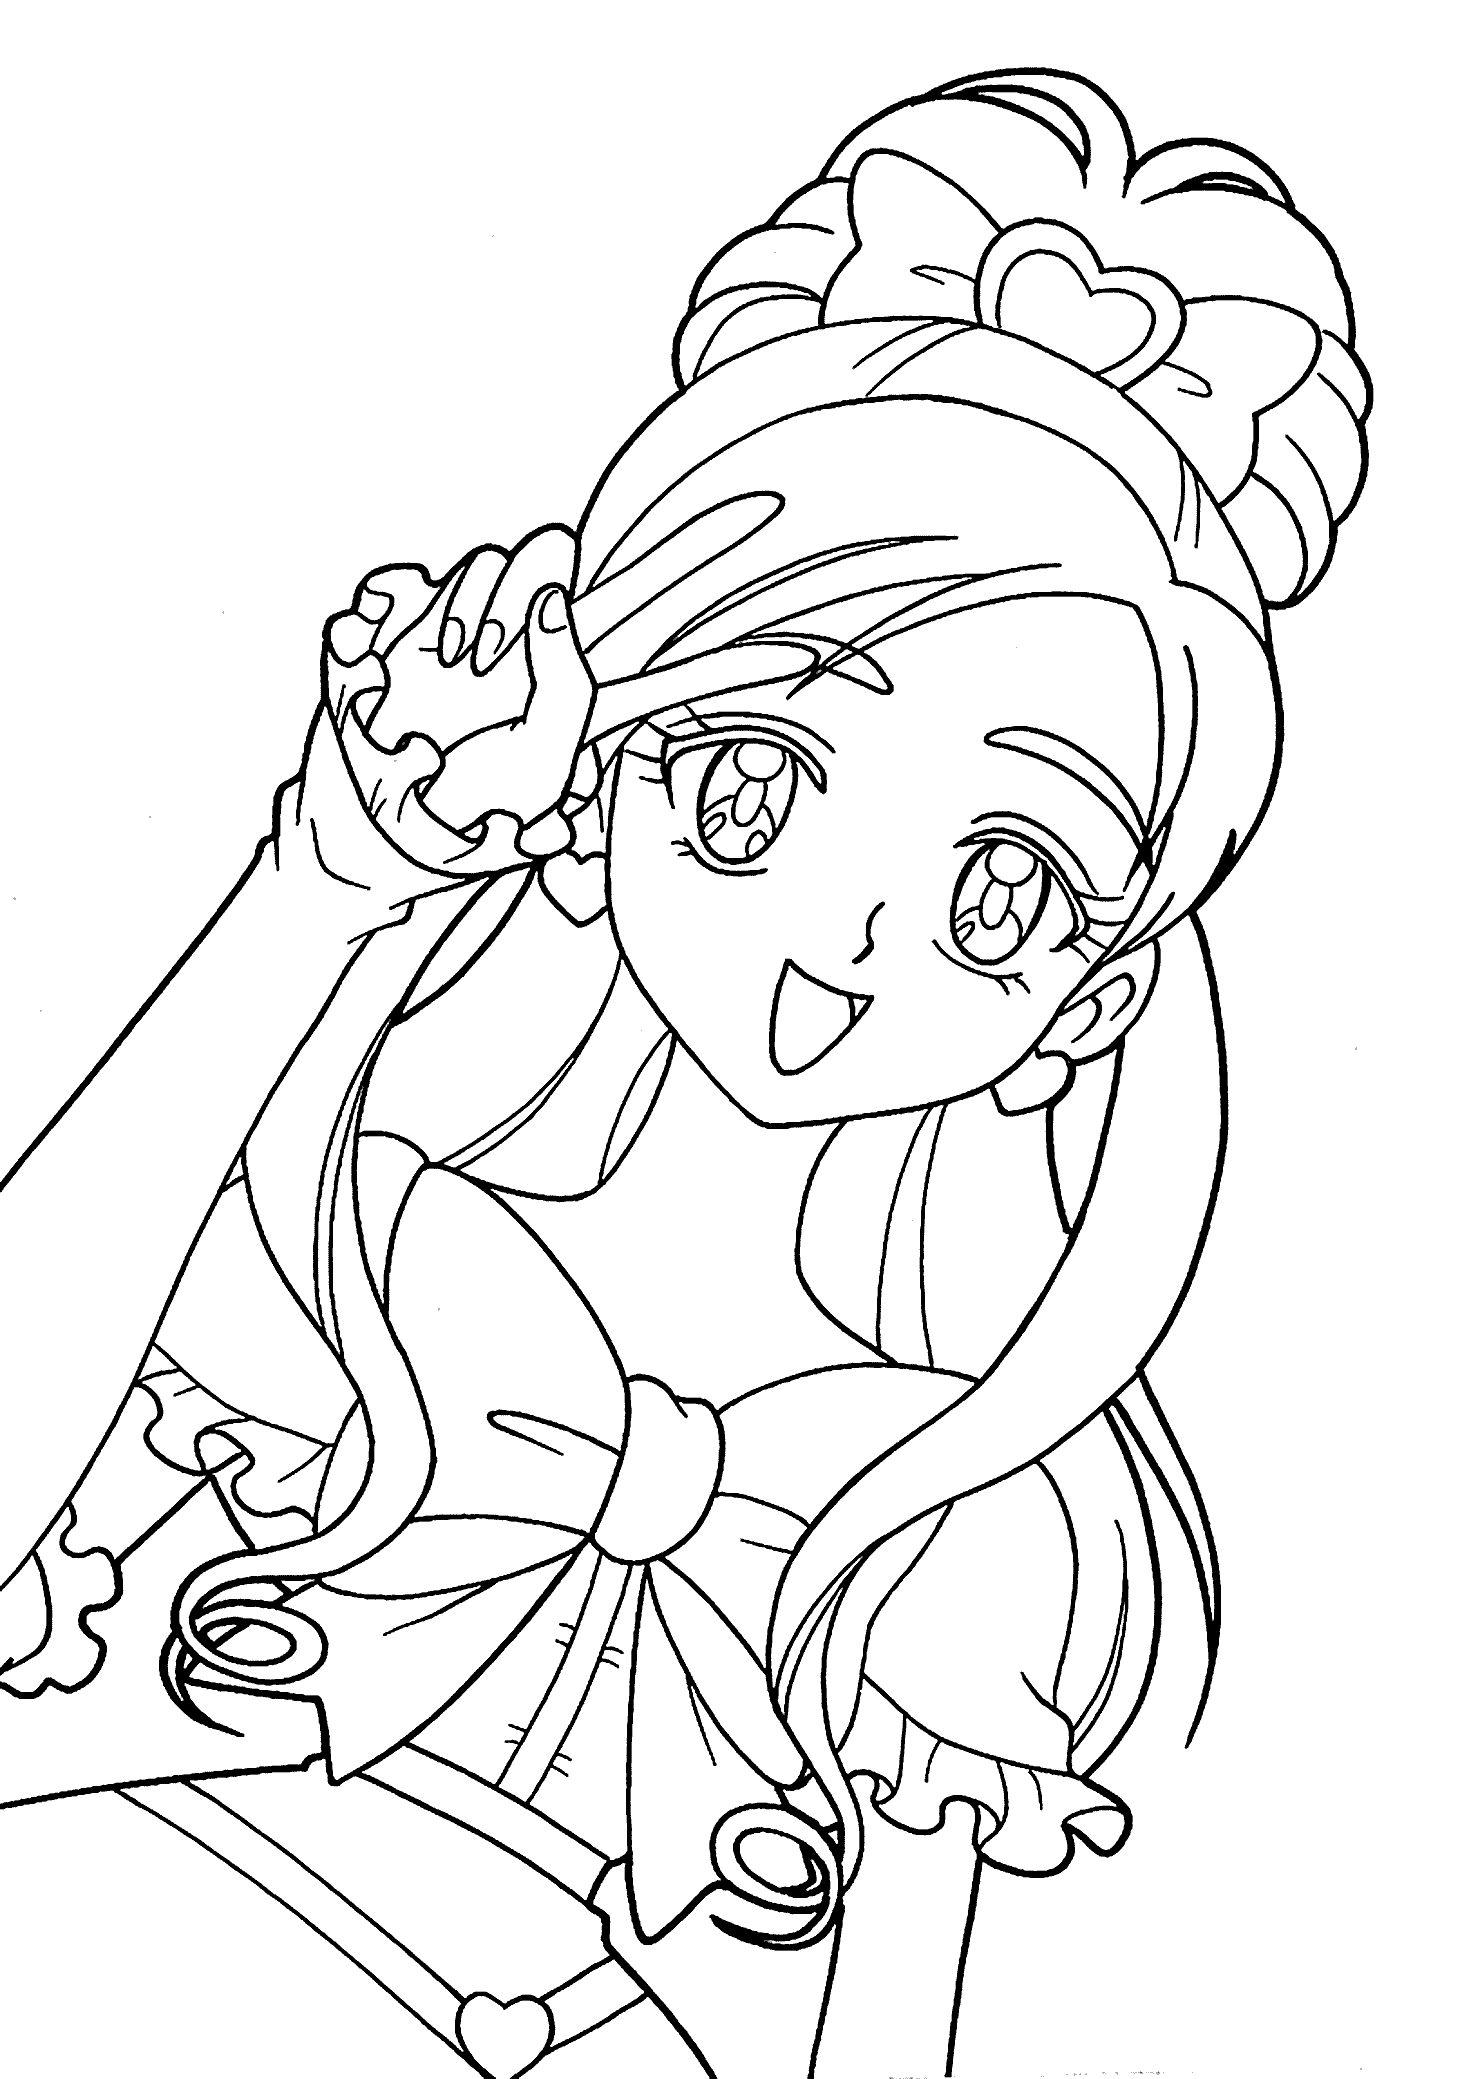 animation coloring pages - High Quality Coloring Pages